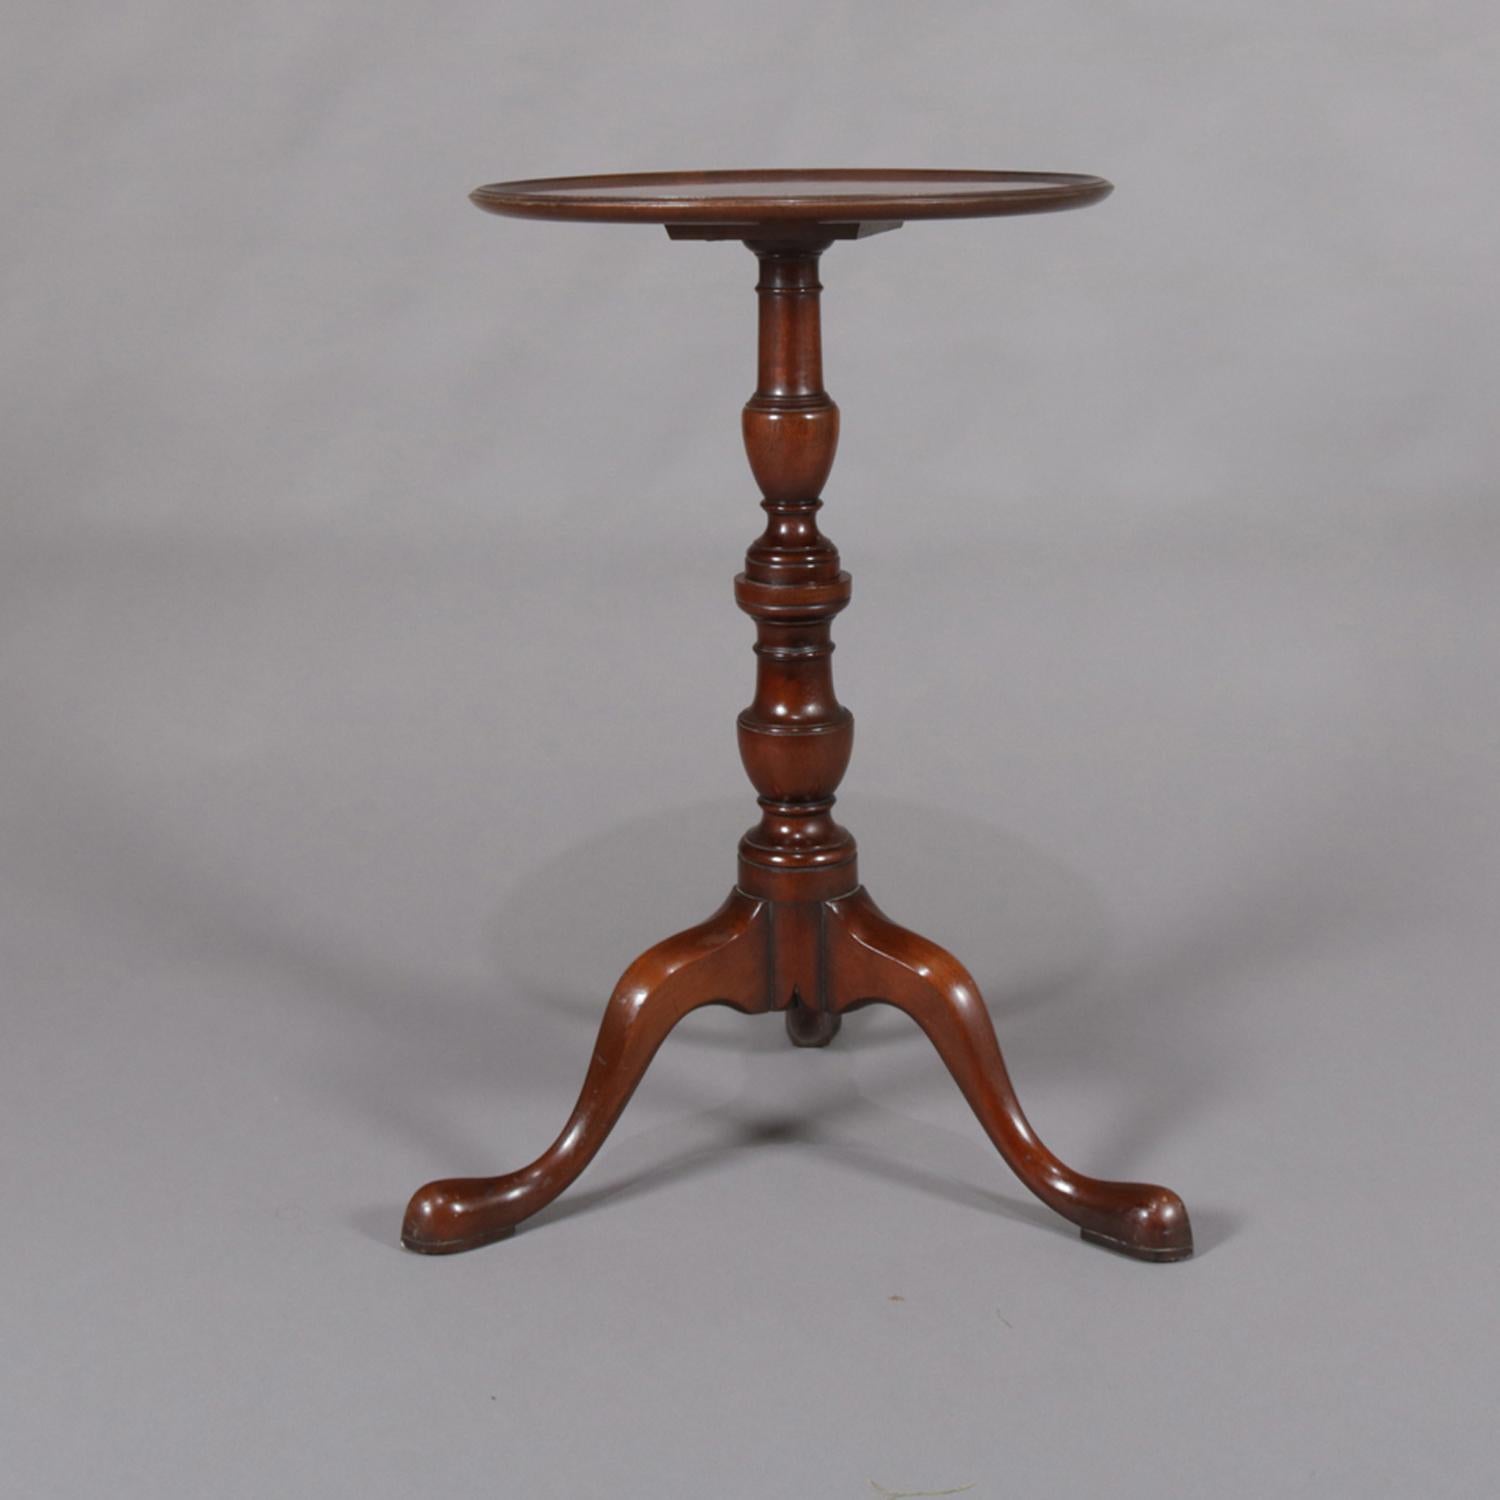 American Vintage Queen Anne Mahogany Tripod Side Stand by Kittinger, circa 1940